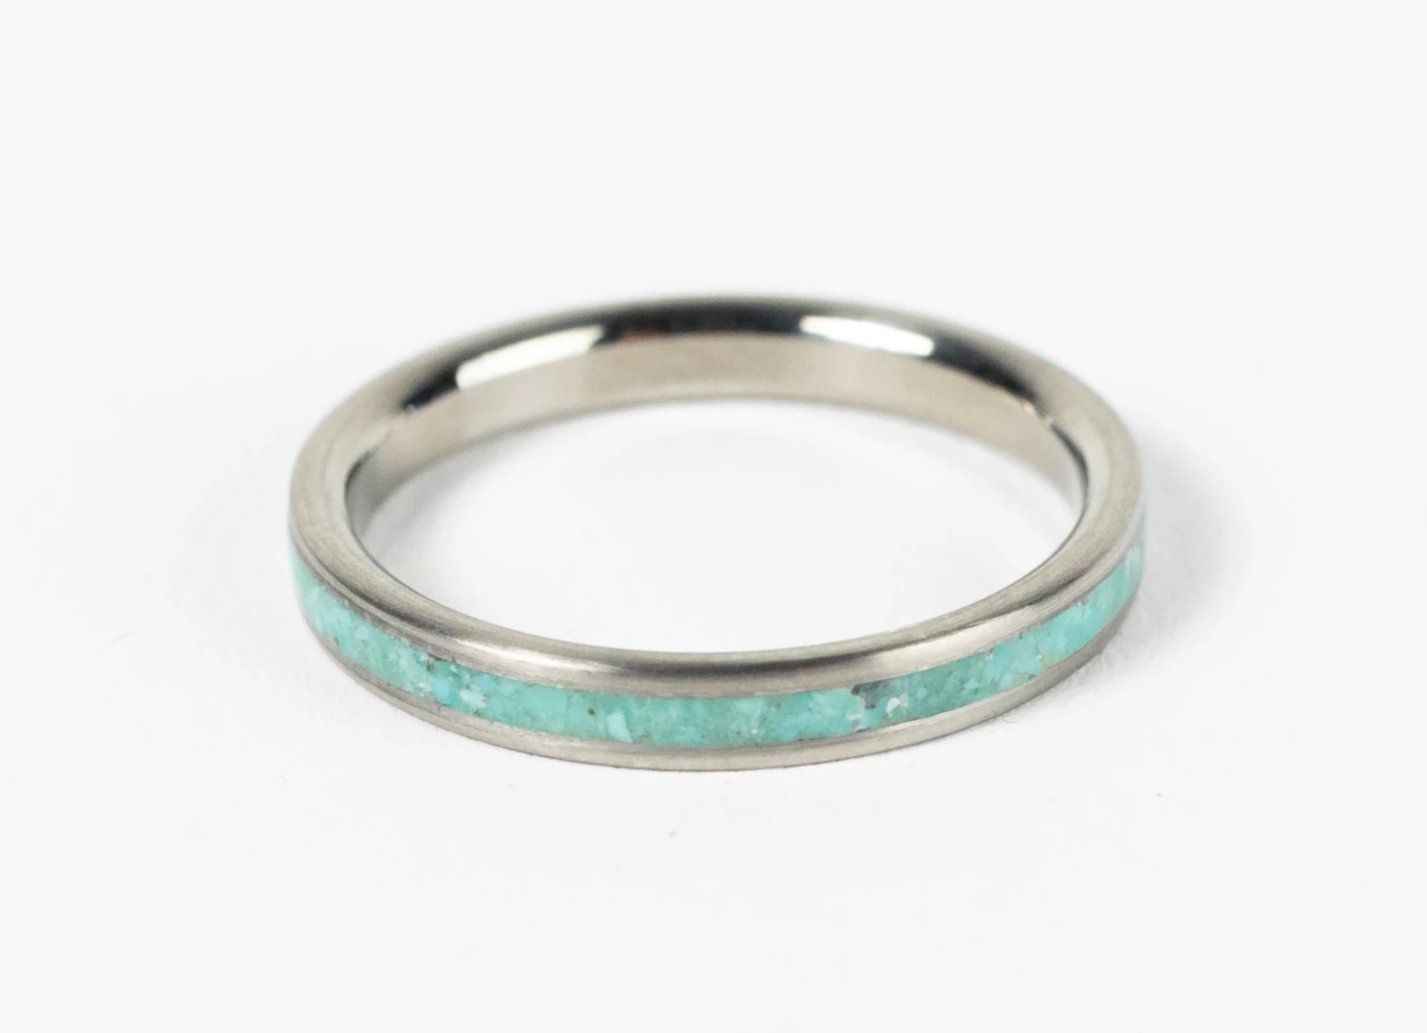 Turquoise his and hers wedding ring set